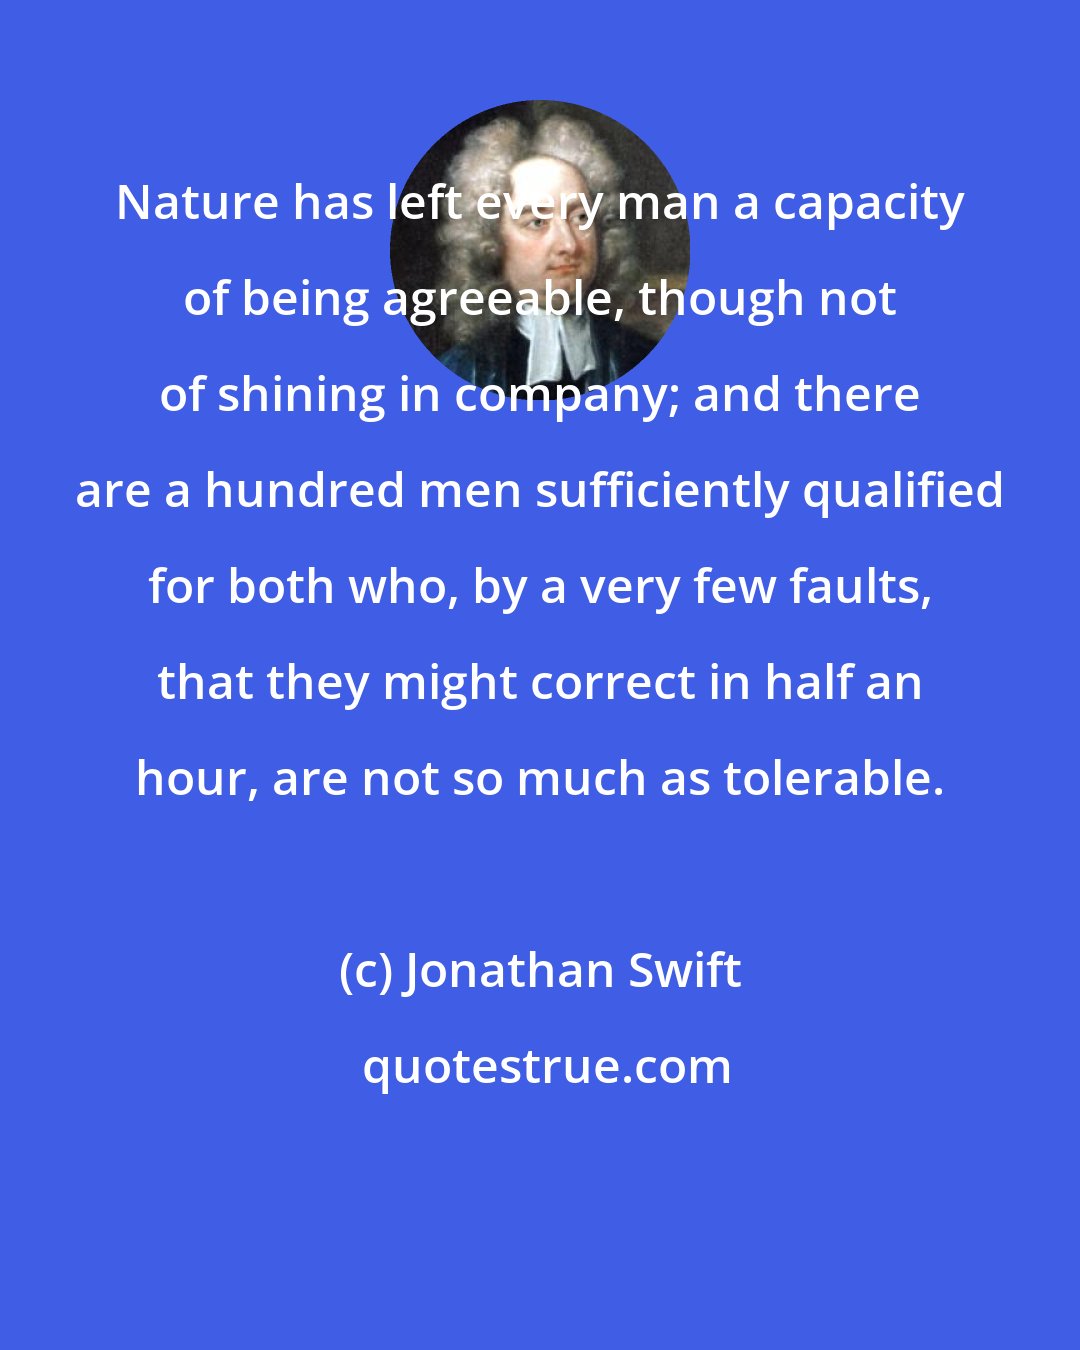 Jonathan Swift: Nature has left every man a capacity of being agreeable, though not of shining in company; and there are a hundred men sufficiently qualified for both who, by a very few faults, that they might correct in half an hour, are not so much as tolerable.